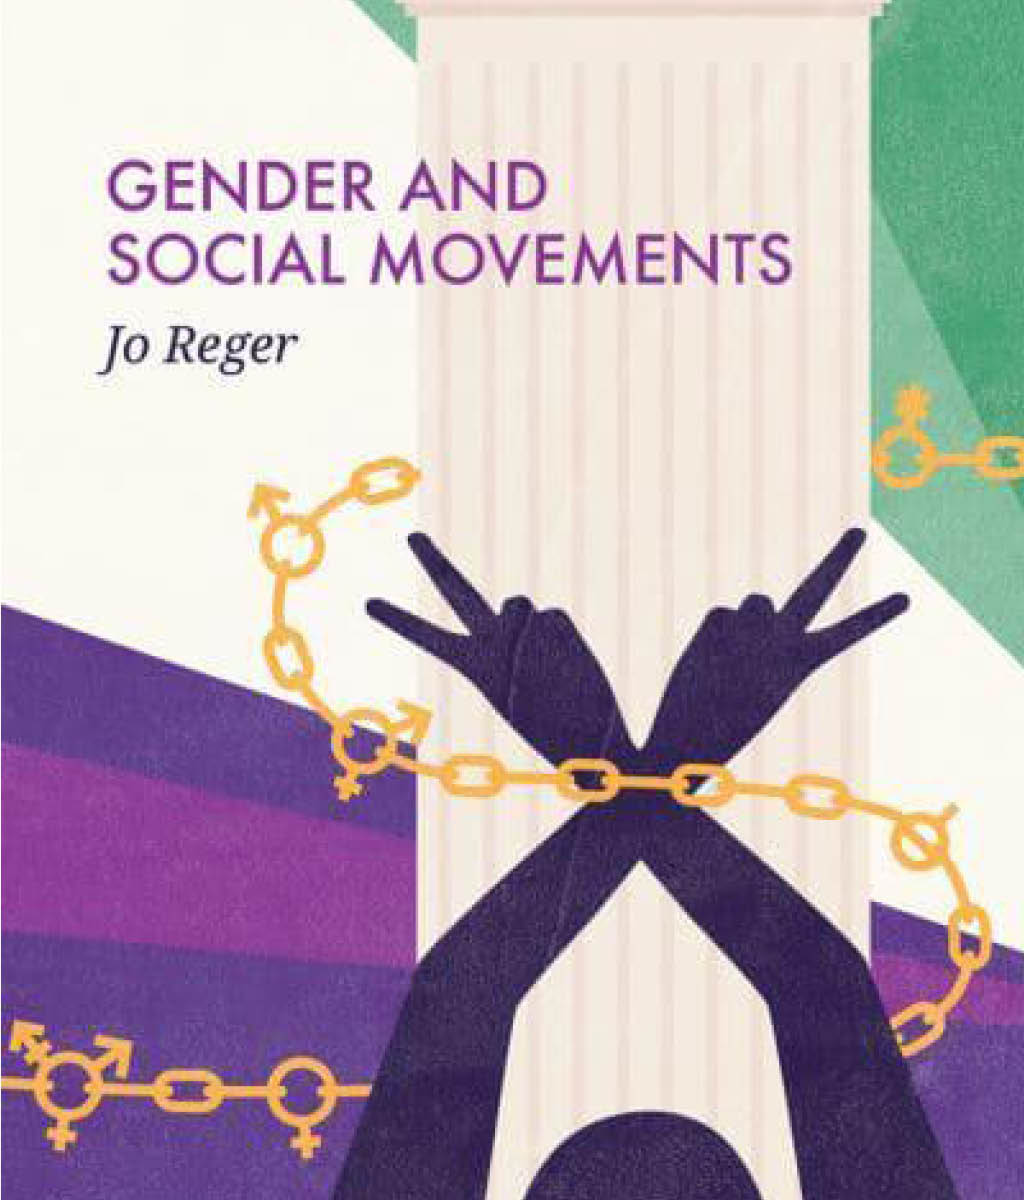 Gender and Social Movements by Jo Reger